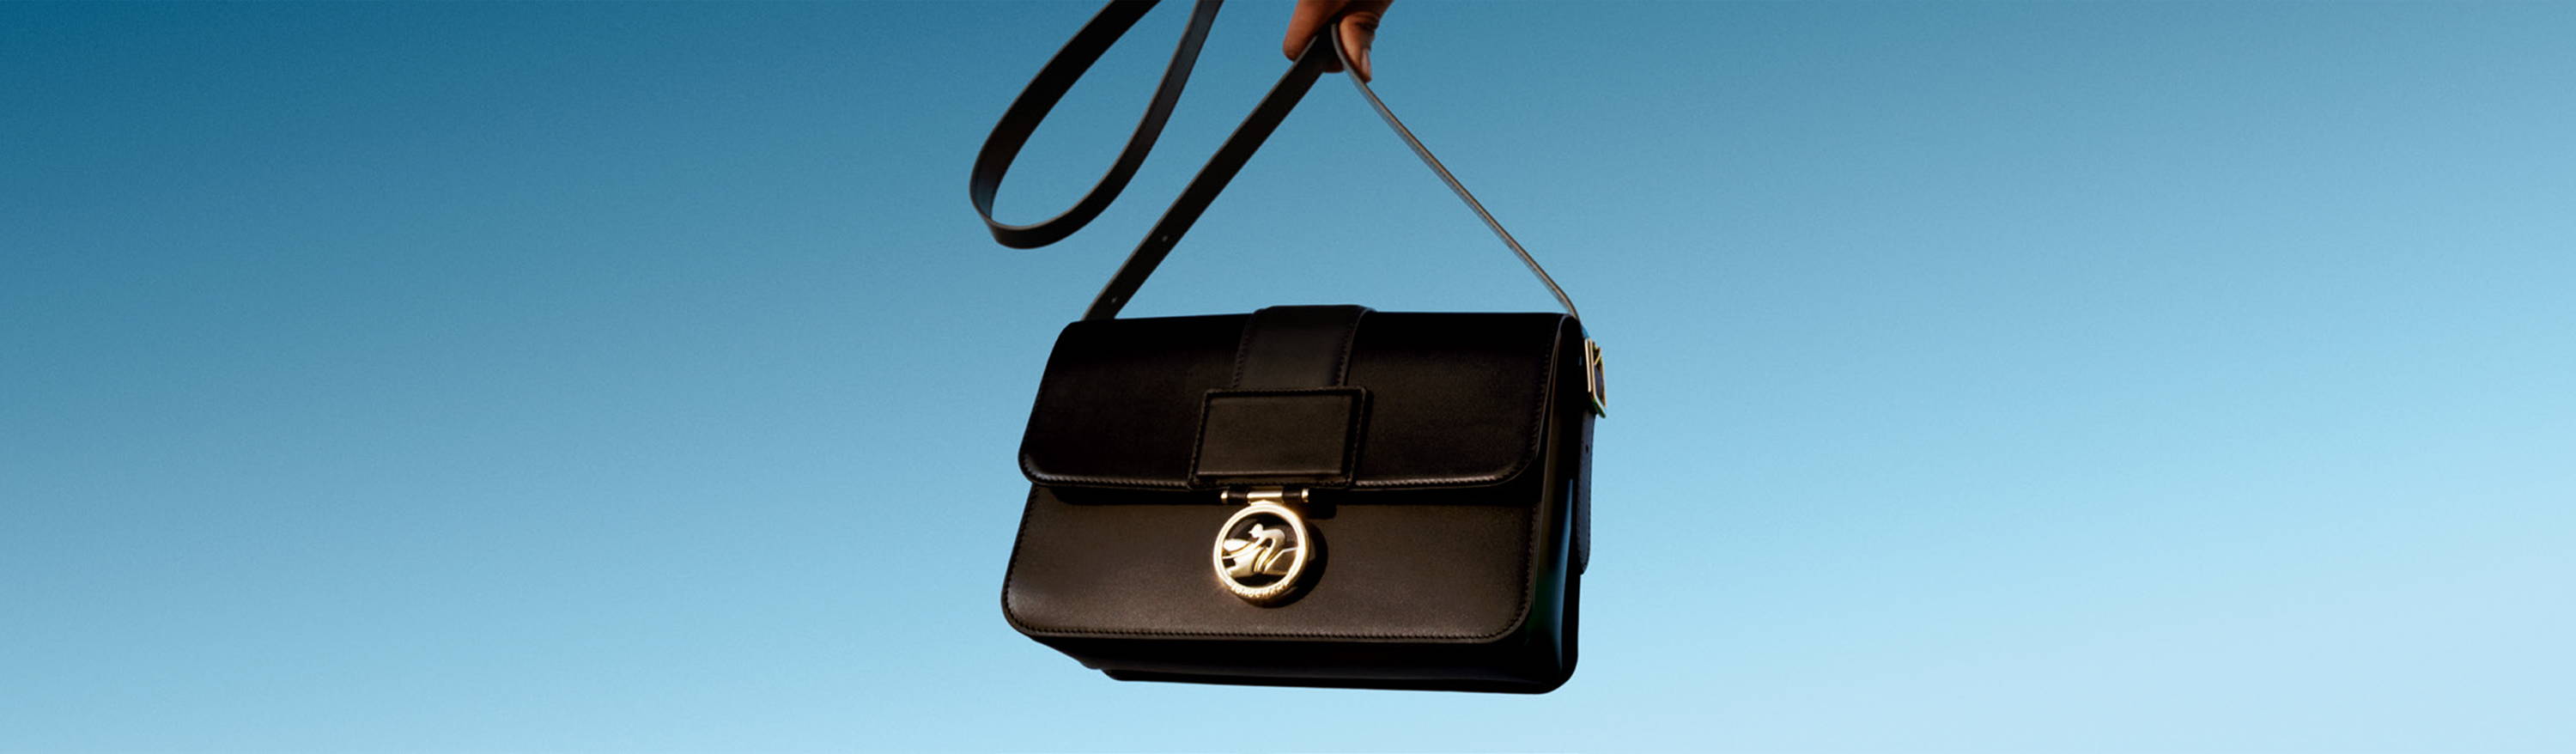 The Box-Trot: Introducing the New It-Bag